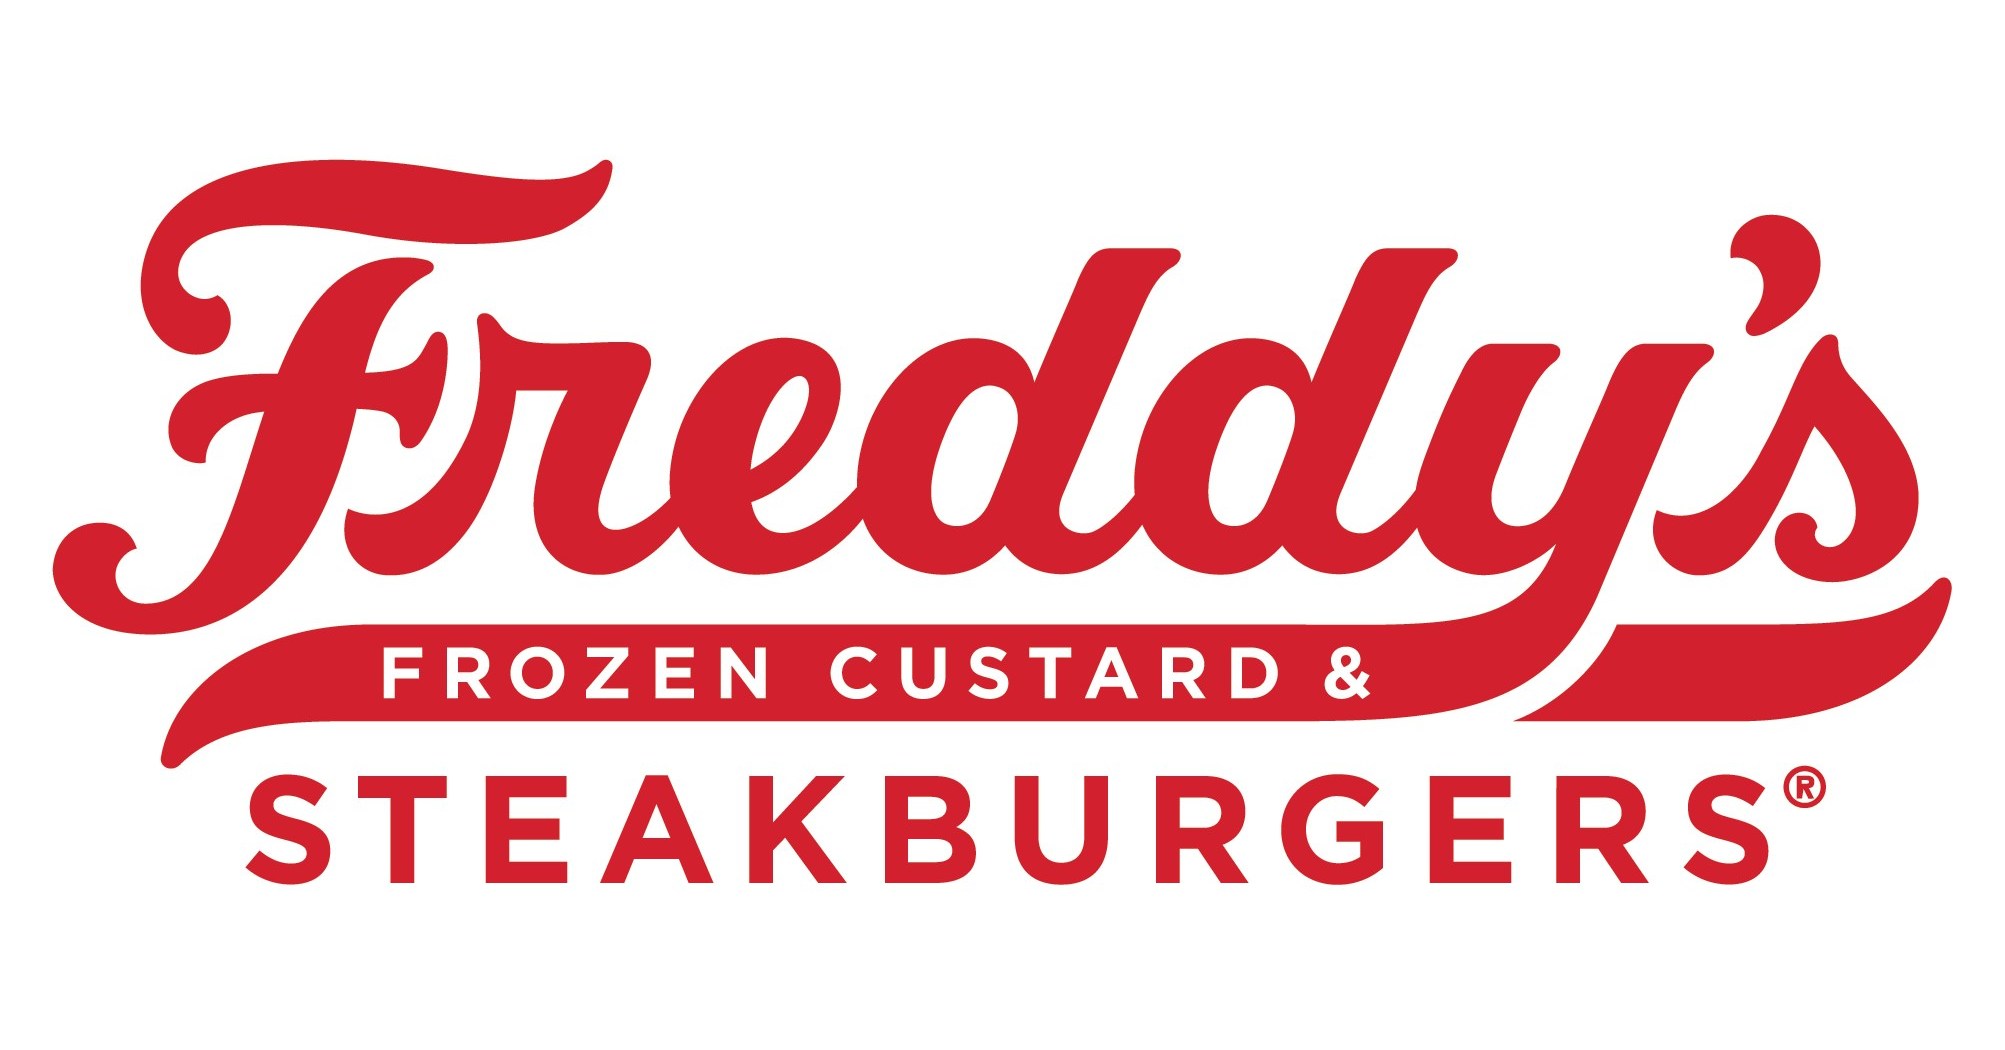 Thinly pressed steakburger,' creamy frozen custard sound good? Freddy's  opens Sunday in Baton Rouge, Entertainment/Life